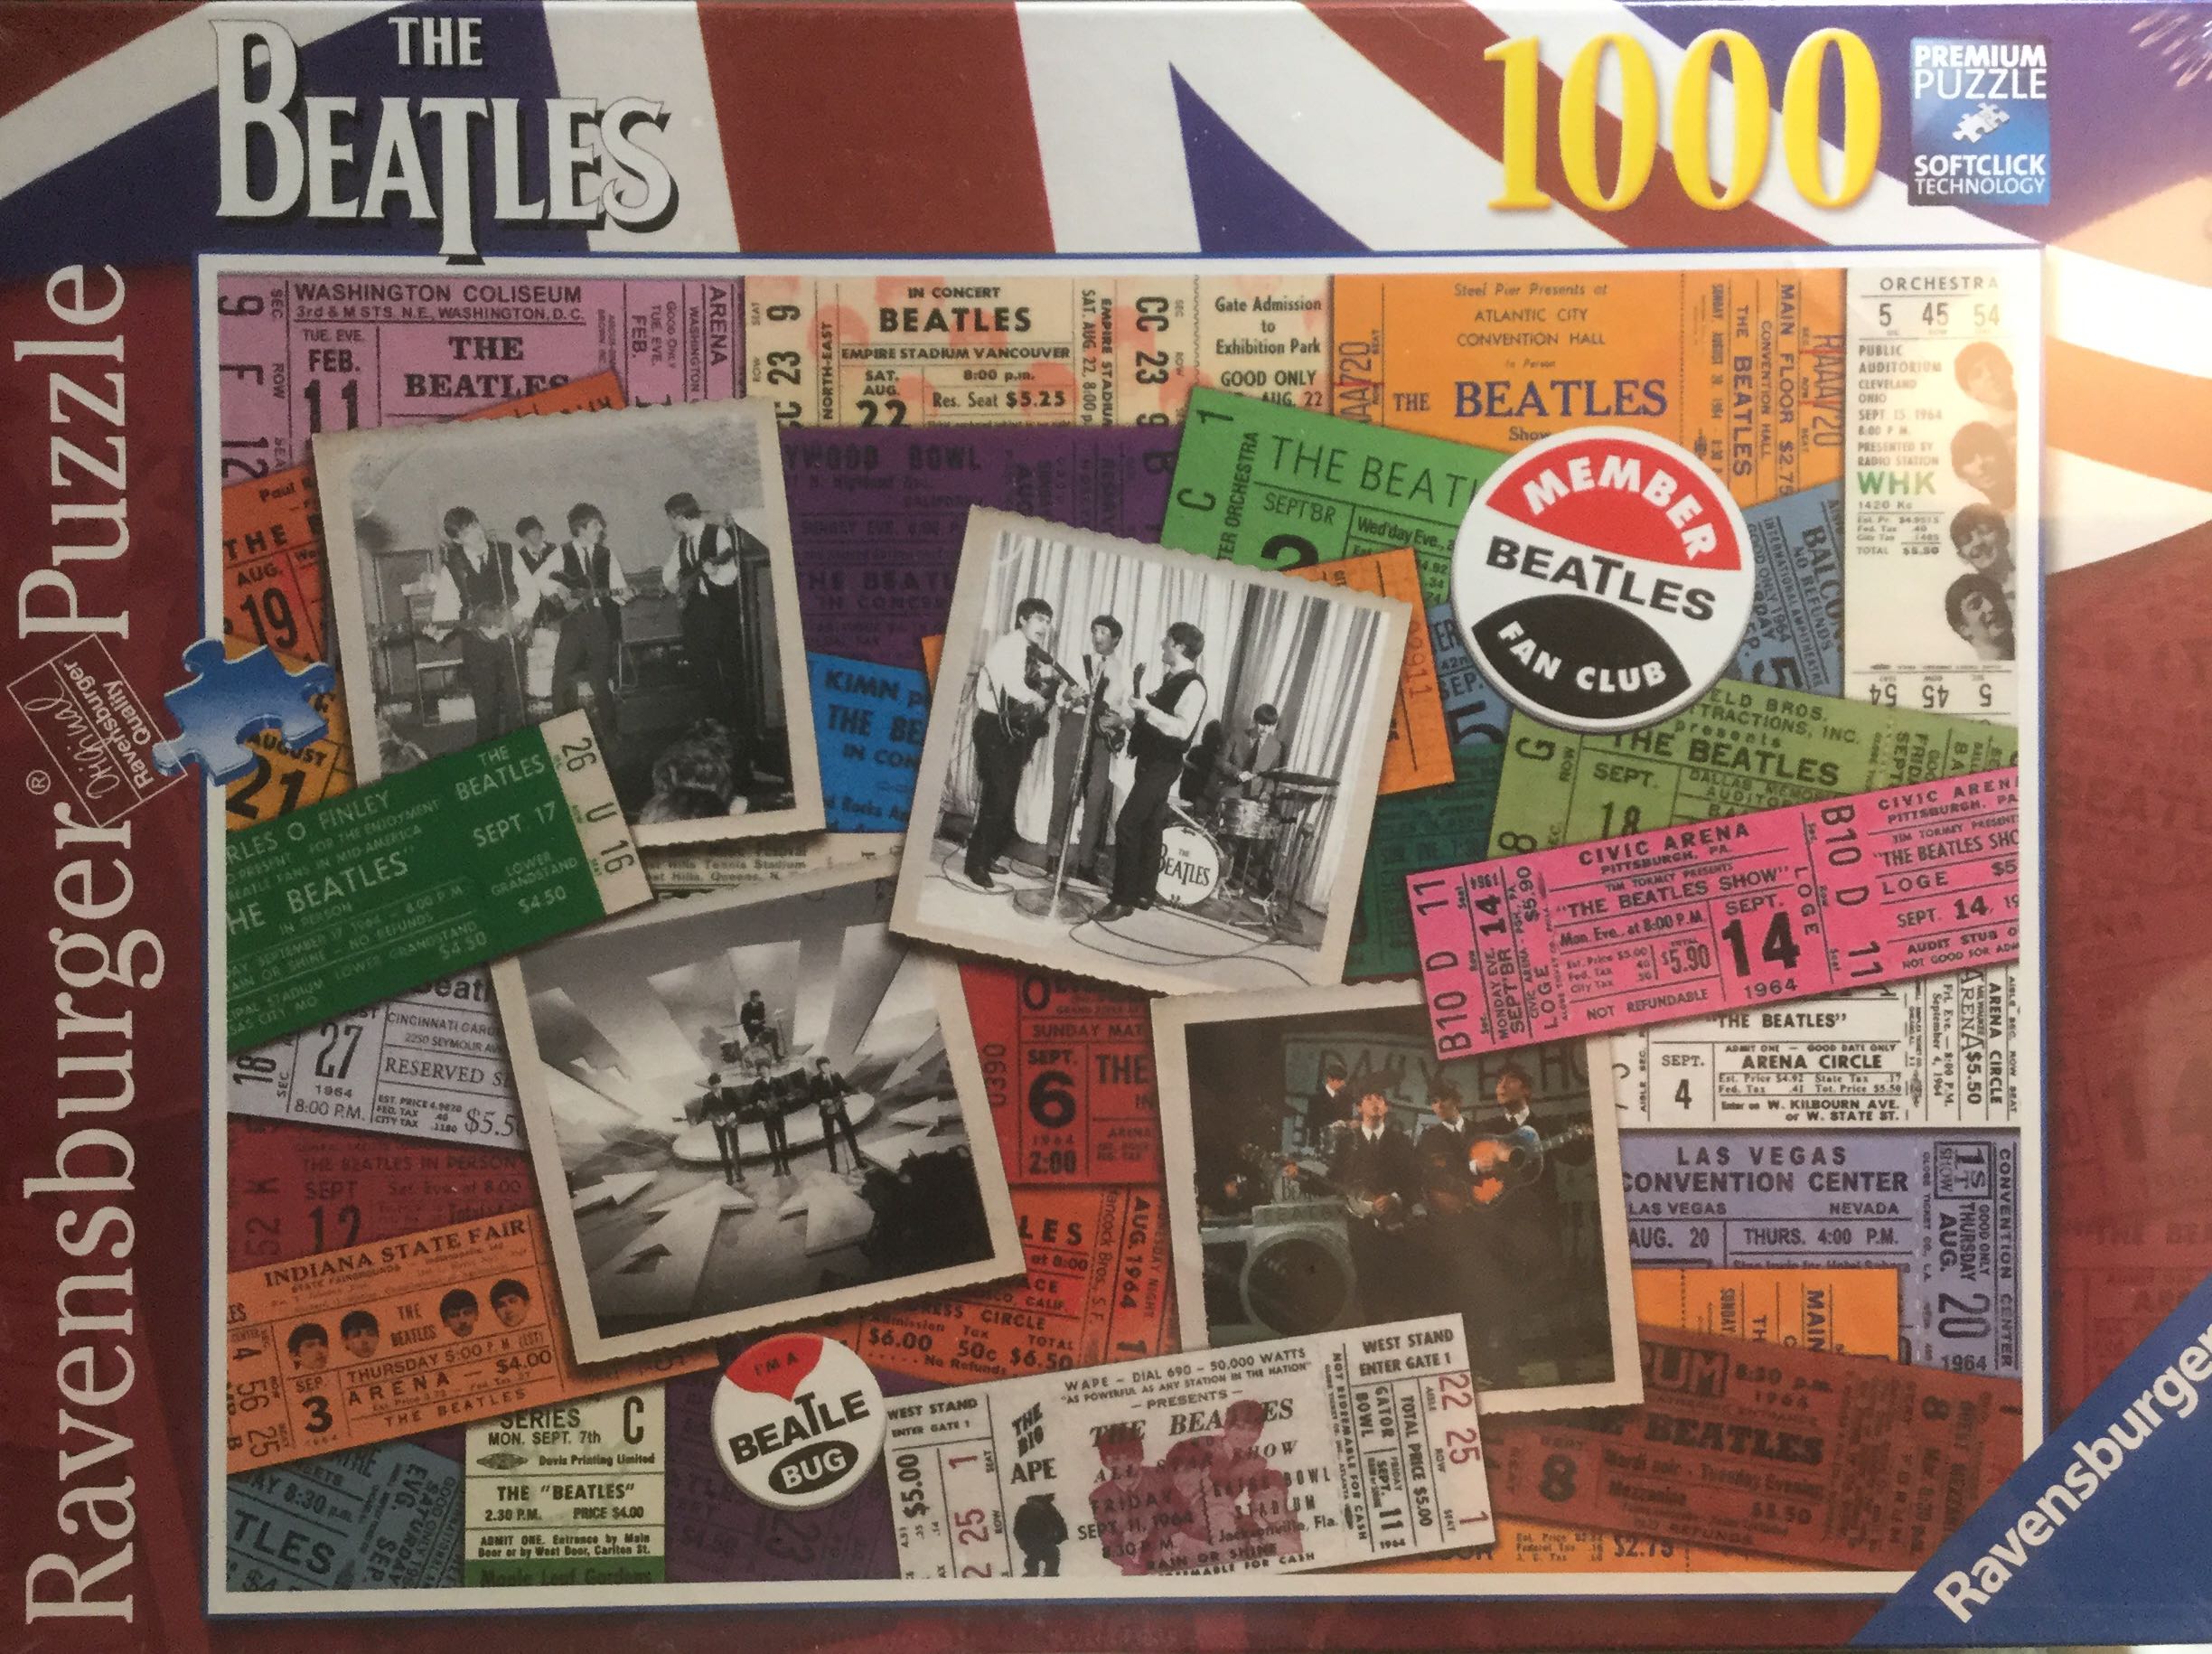 The Beatles Tickets - Ravensburger puzzle collectible [Barcode 4005556197514] - Main Image 1